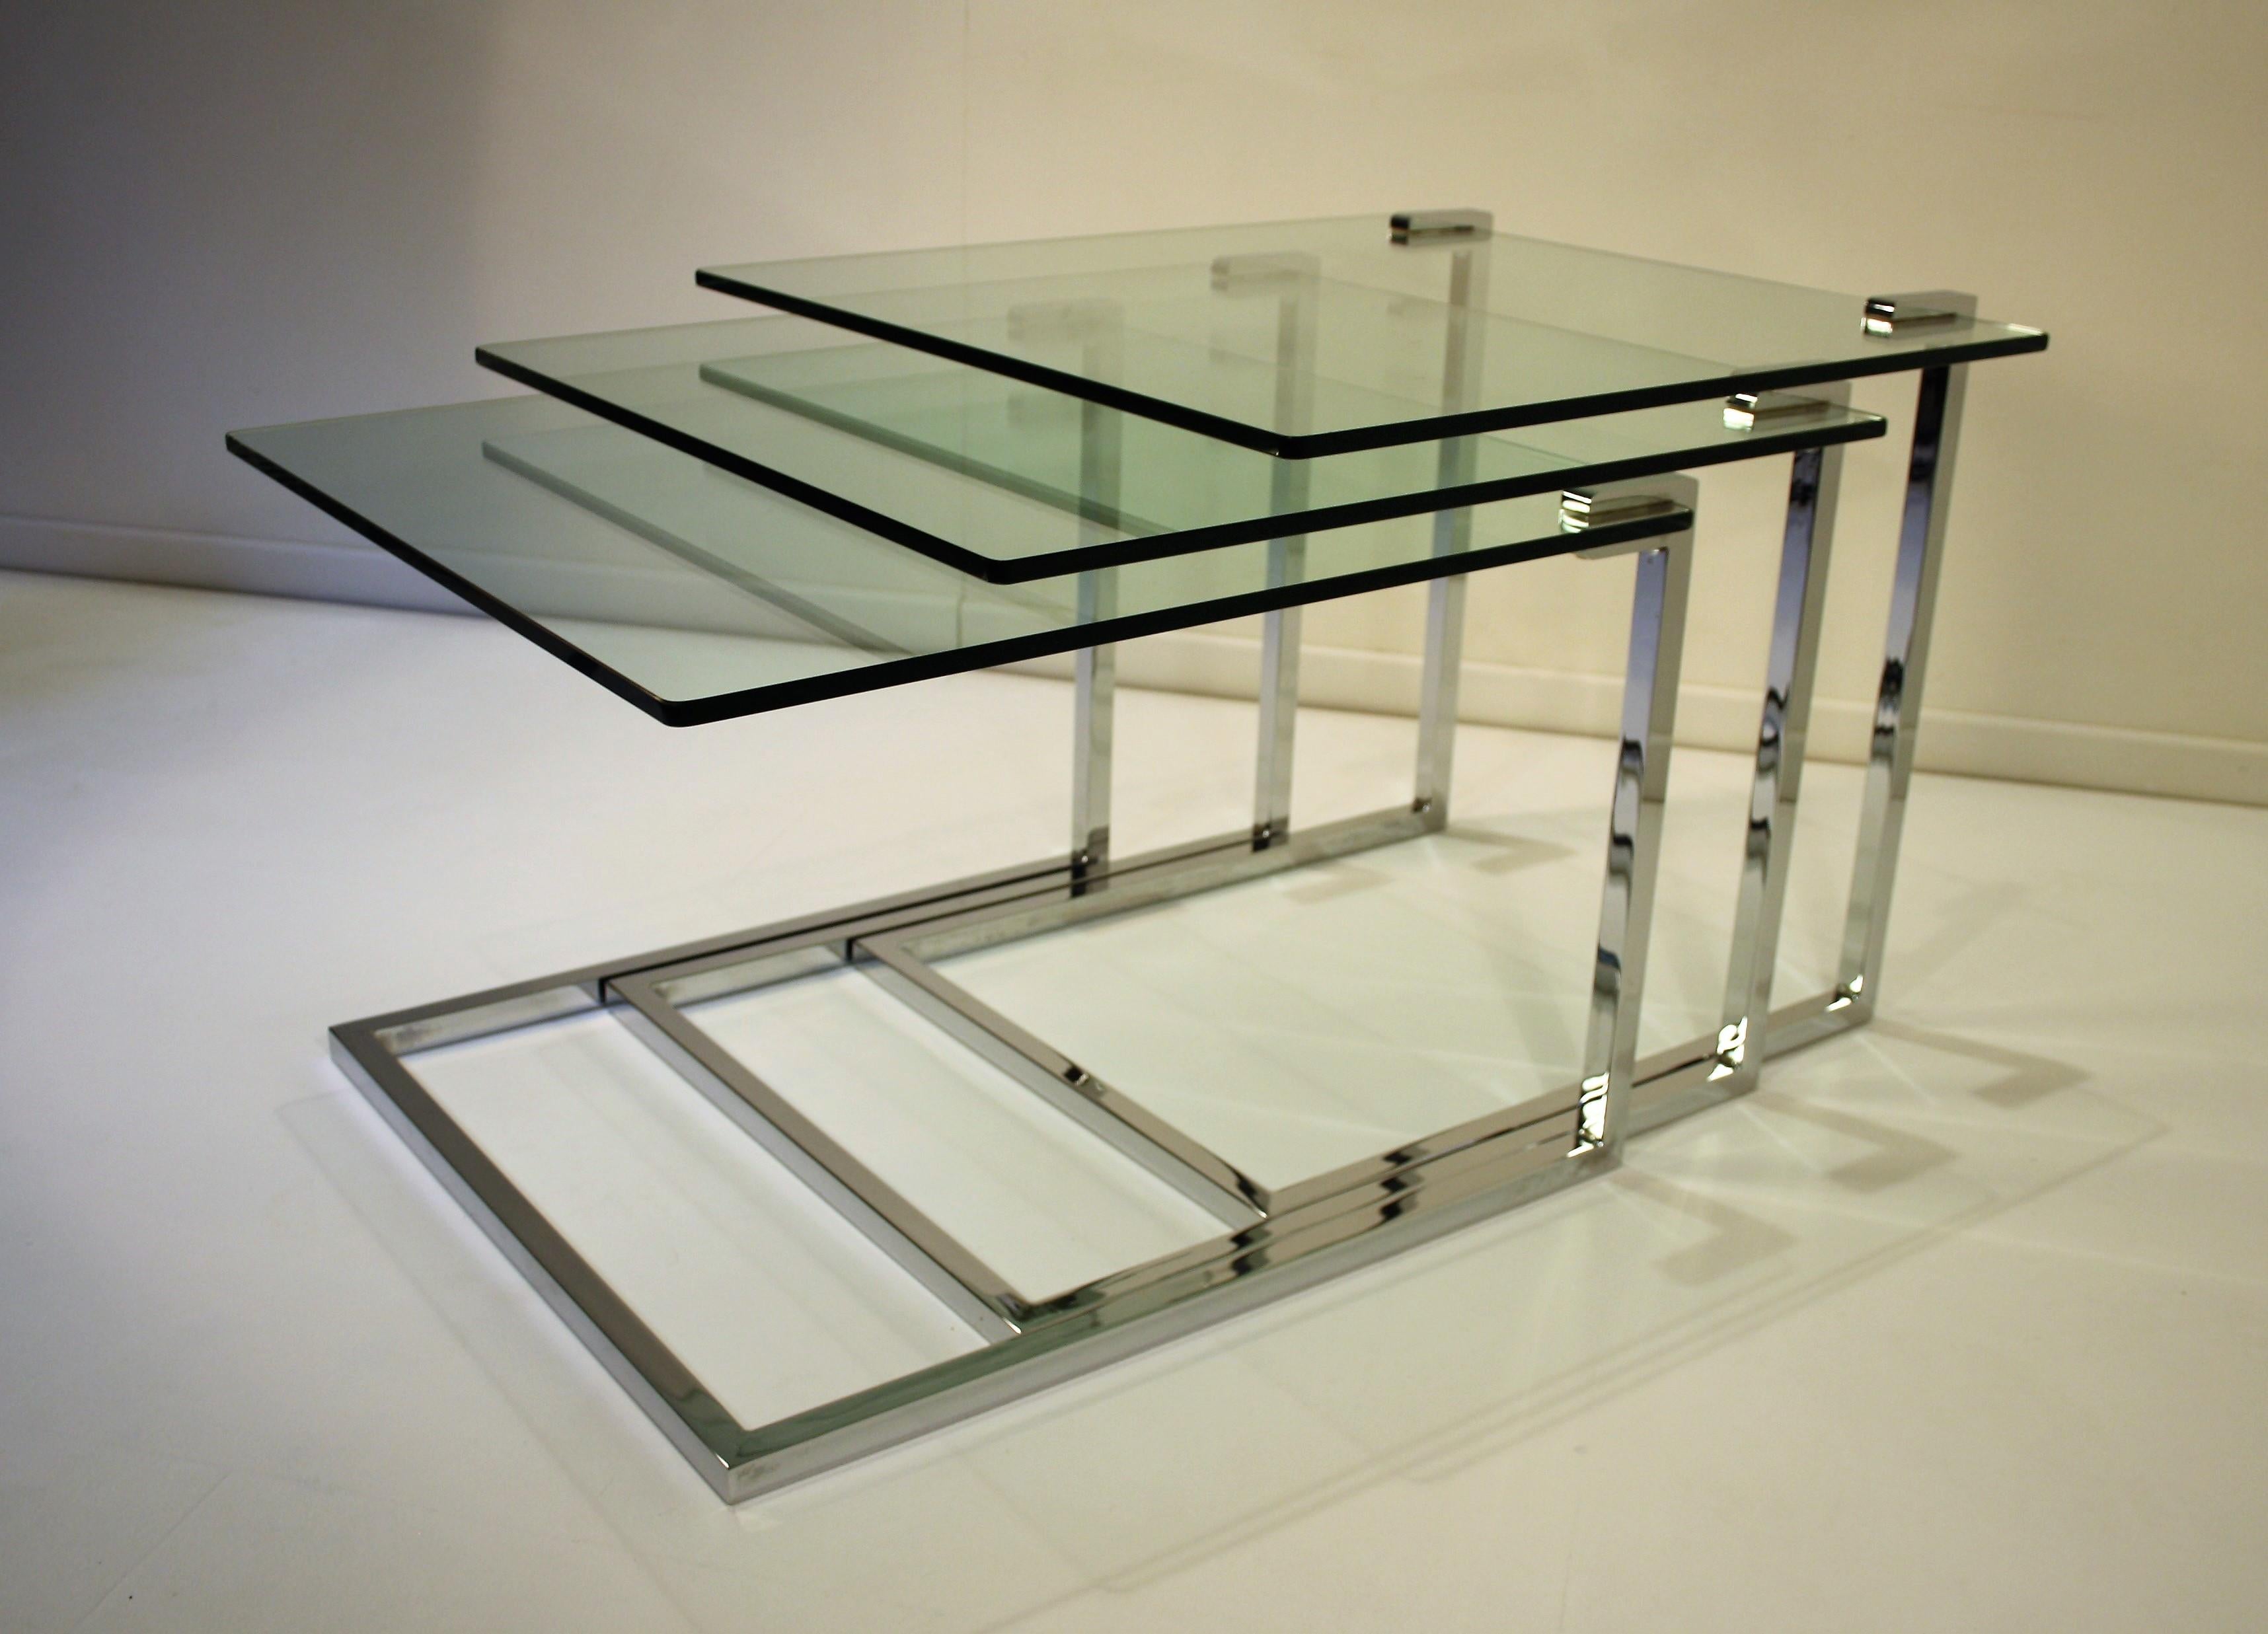 Three beautiful modernistic nesting Tables from the 1970s in chrome, each with a thick glass plate.
What is very apart is that all the glass plates have the same sizes.
The work of this design is comparable to Romeo Rega and Willy Rizzo.